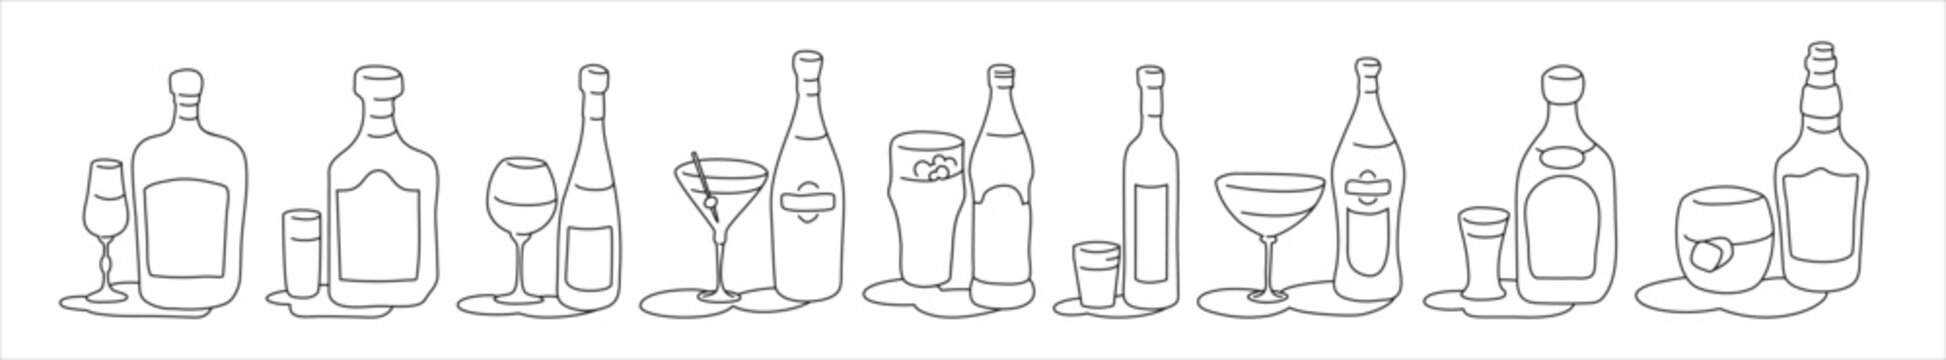 Liquor rum wine martini beer vodka vermouth tequila whiskey bottle and glass outline icon on white background. Black white cartoon sketch graphic design. Doodle style. Hand drawn image. Party drinks